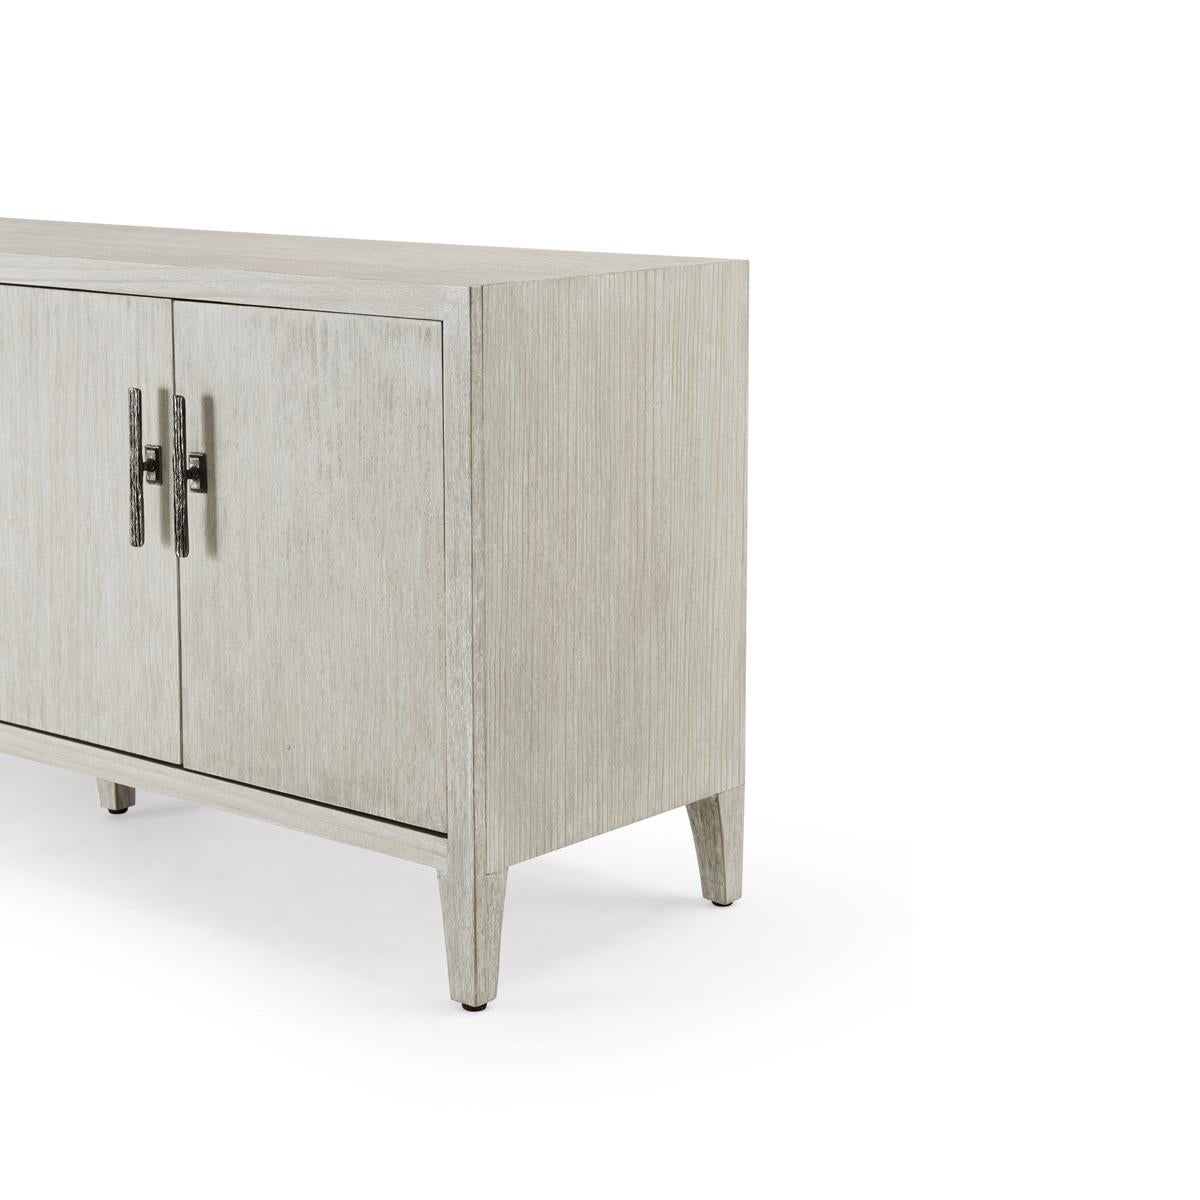 Contemporary Modern Coastal Entertainment Cabinet For Sale